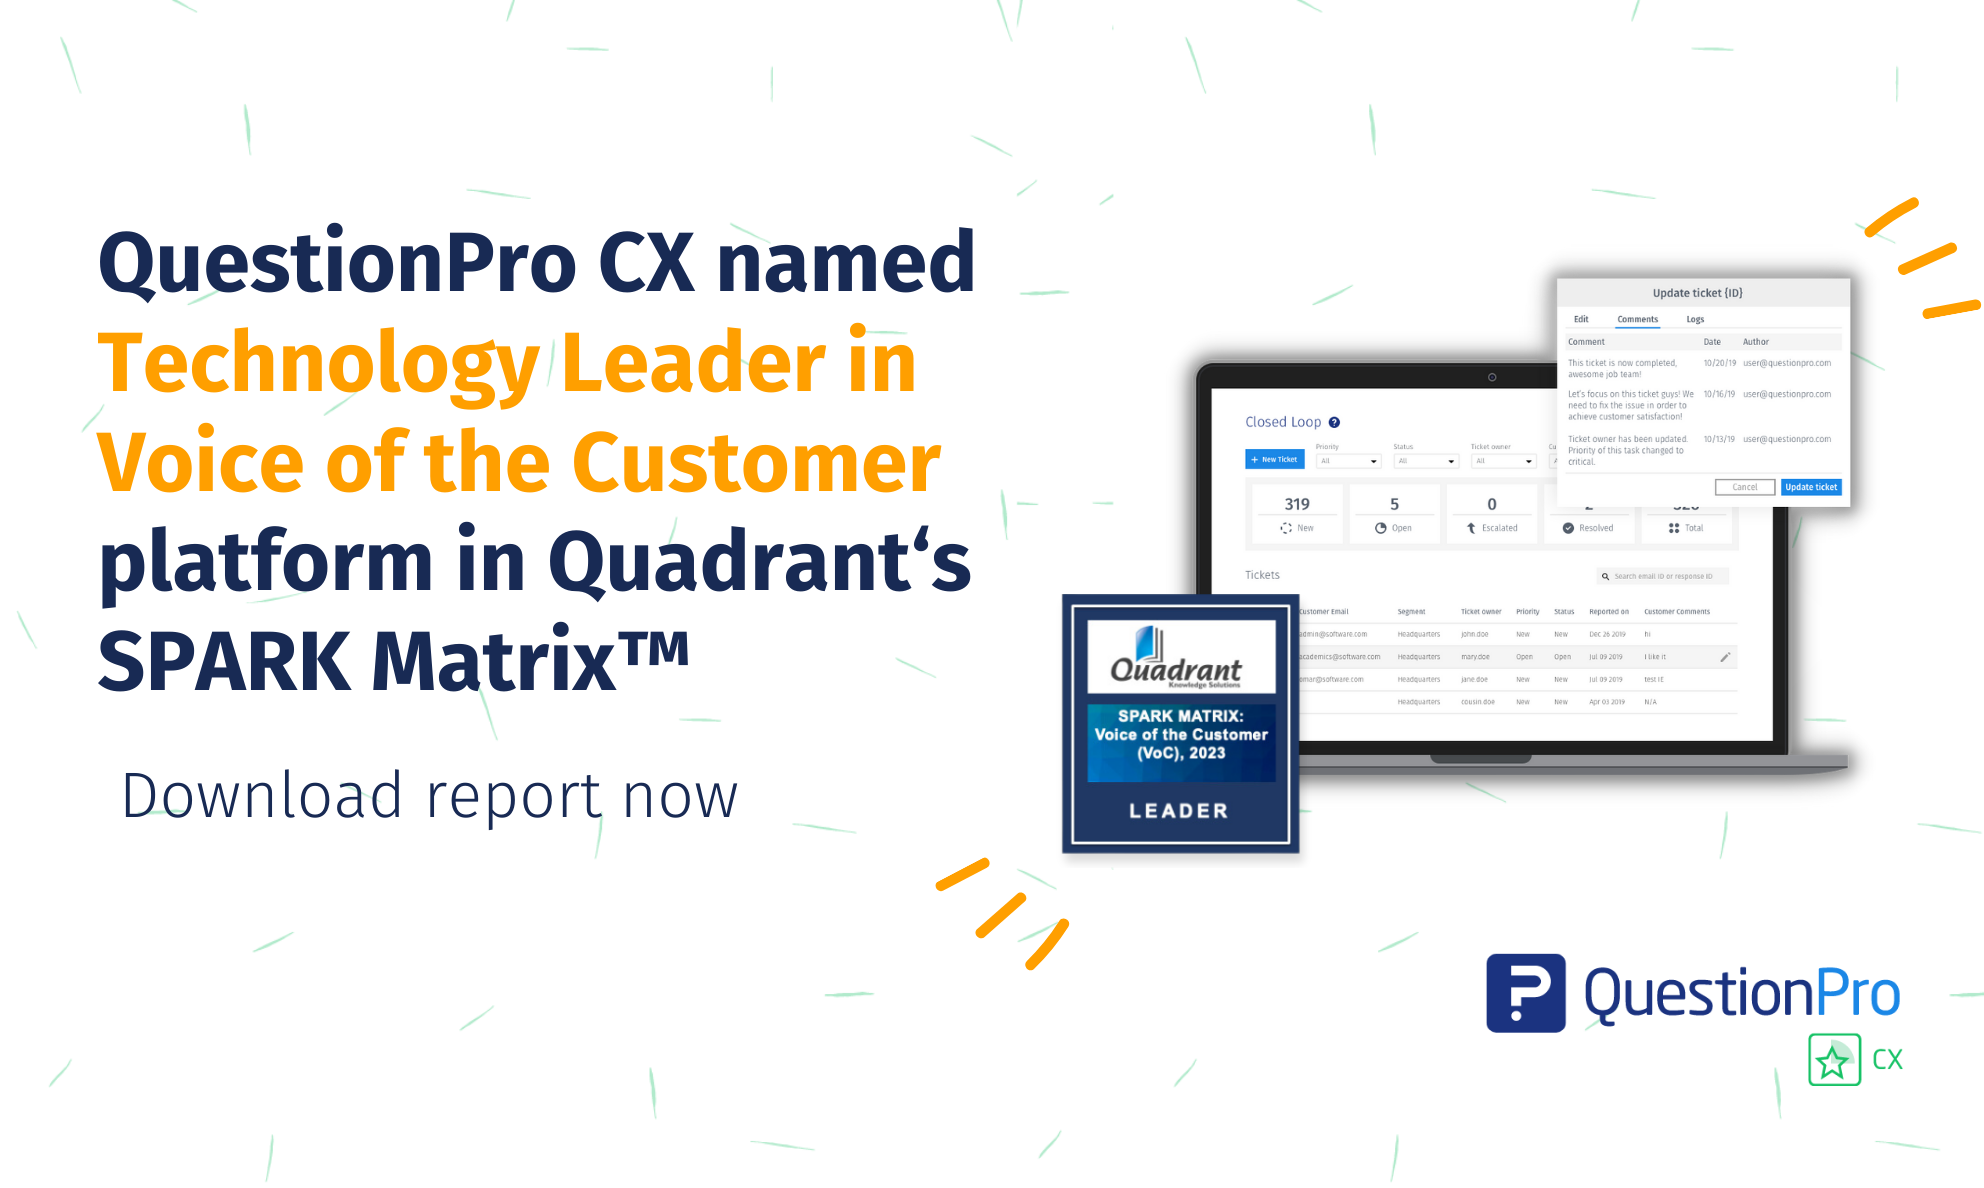 QuestionPro CX has earned the distinction of being recognized as a leading VoC technology provider in the platform market in 2023.